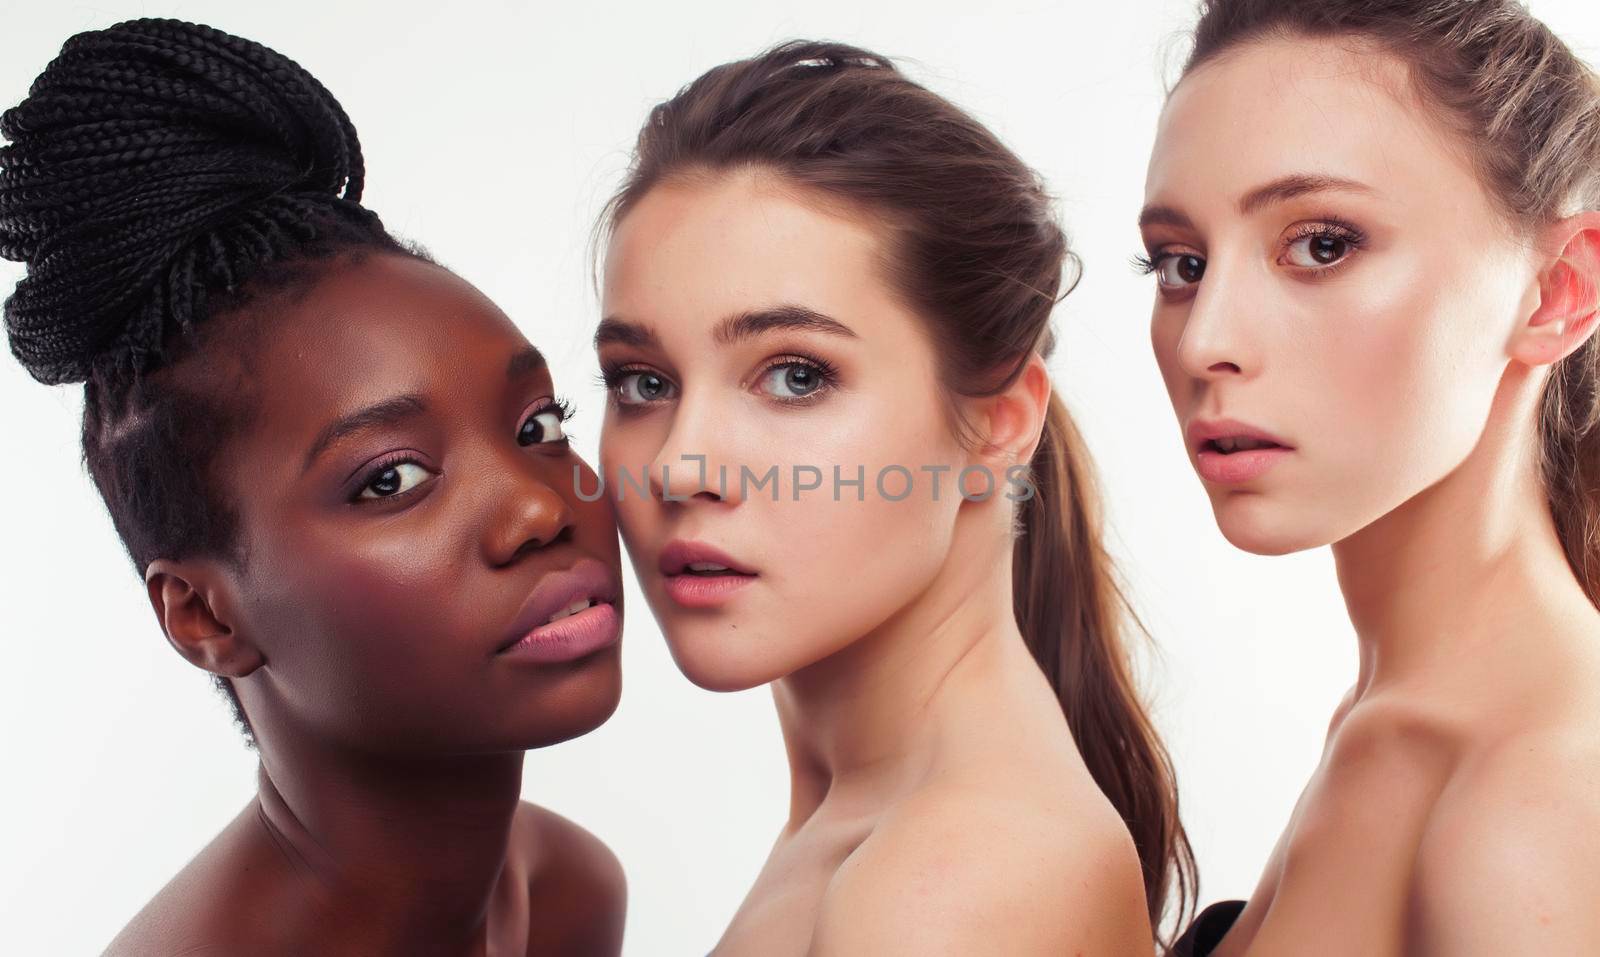 three different nation woman: african-american, caucasian together isolated on white background happy smiling, diverse type on skin, lifestyle real people concept by JordanJ